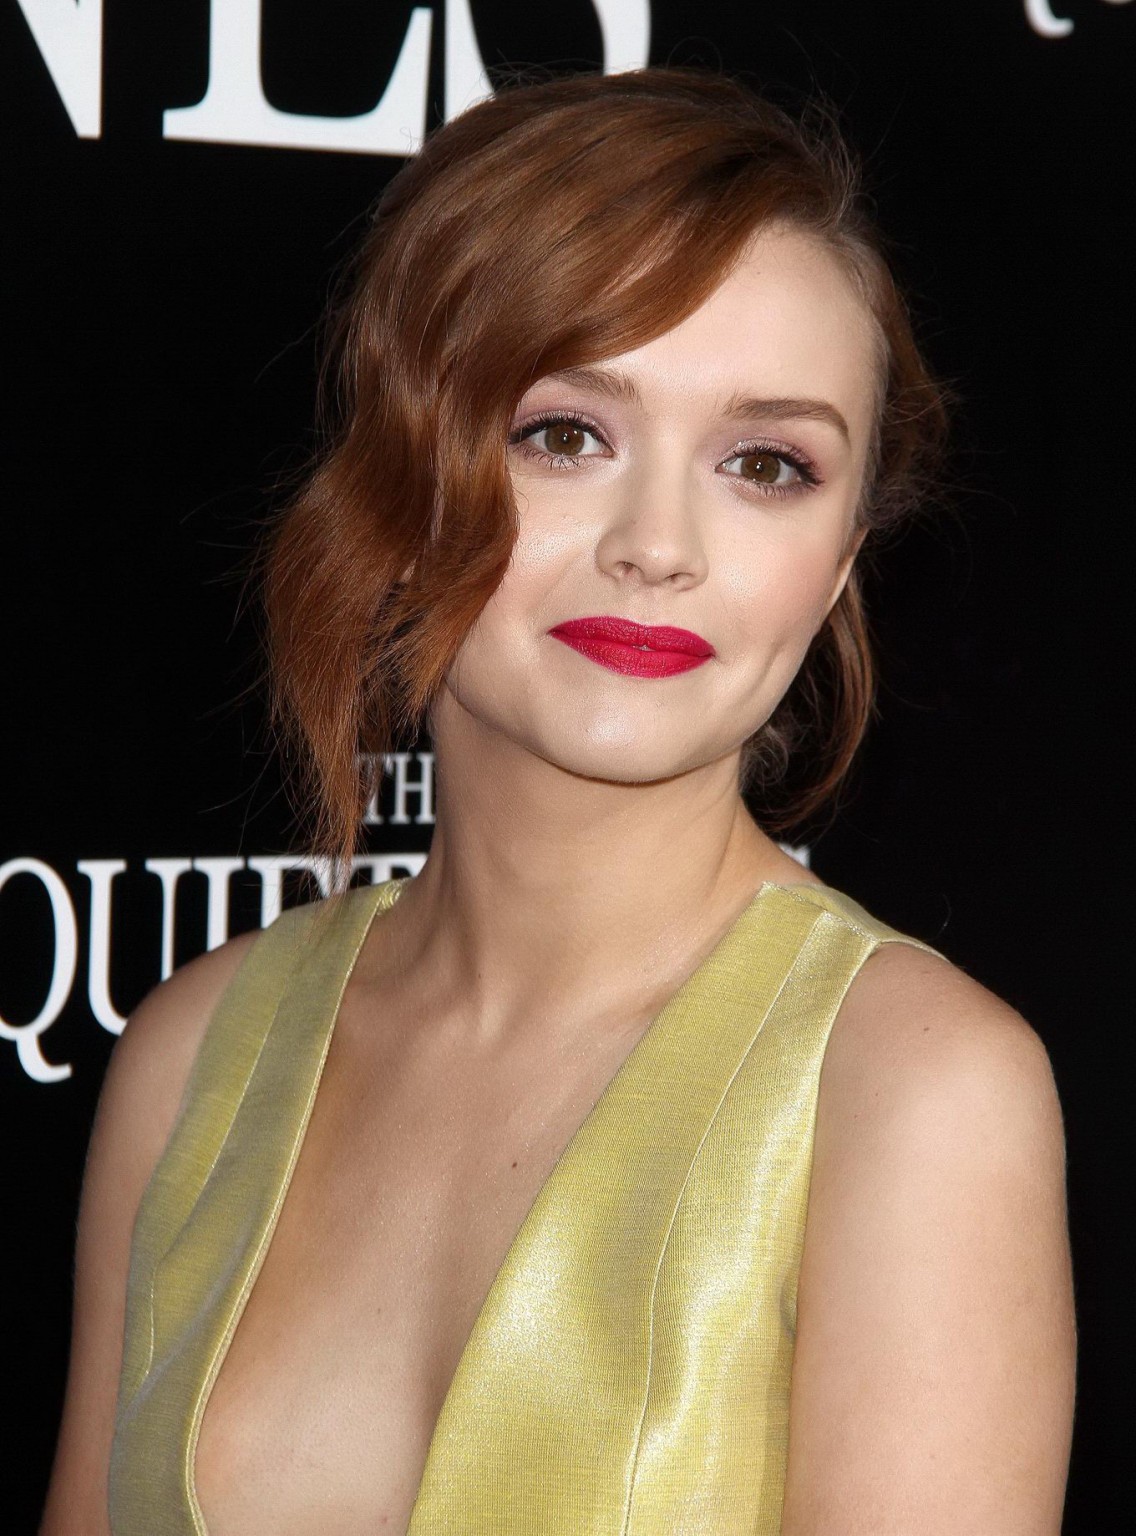 Olivia Cooke showing cleavage at The Quiet Ones premiere in LA #75197814